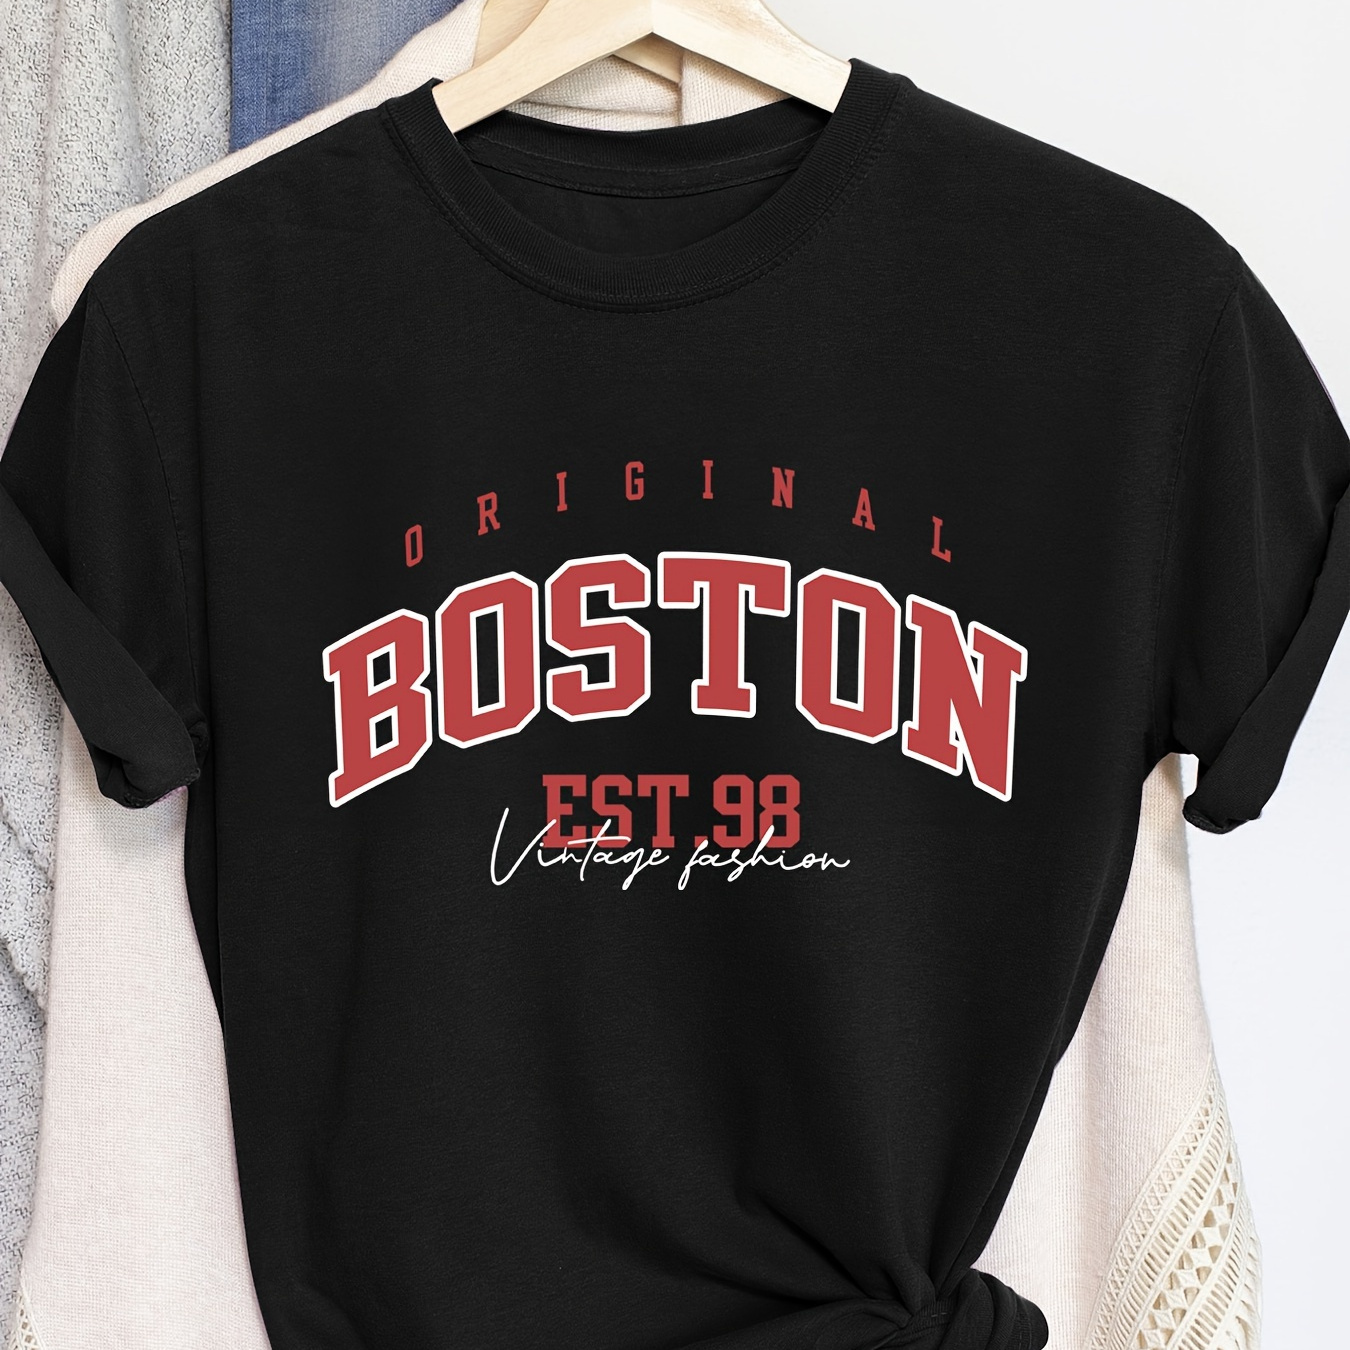 

Boston Letter Print Solid T-shirt, Crew Neck Short Sleeve Casual Every Day Top, Women's Clothing